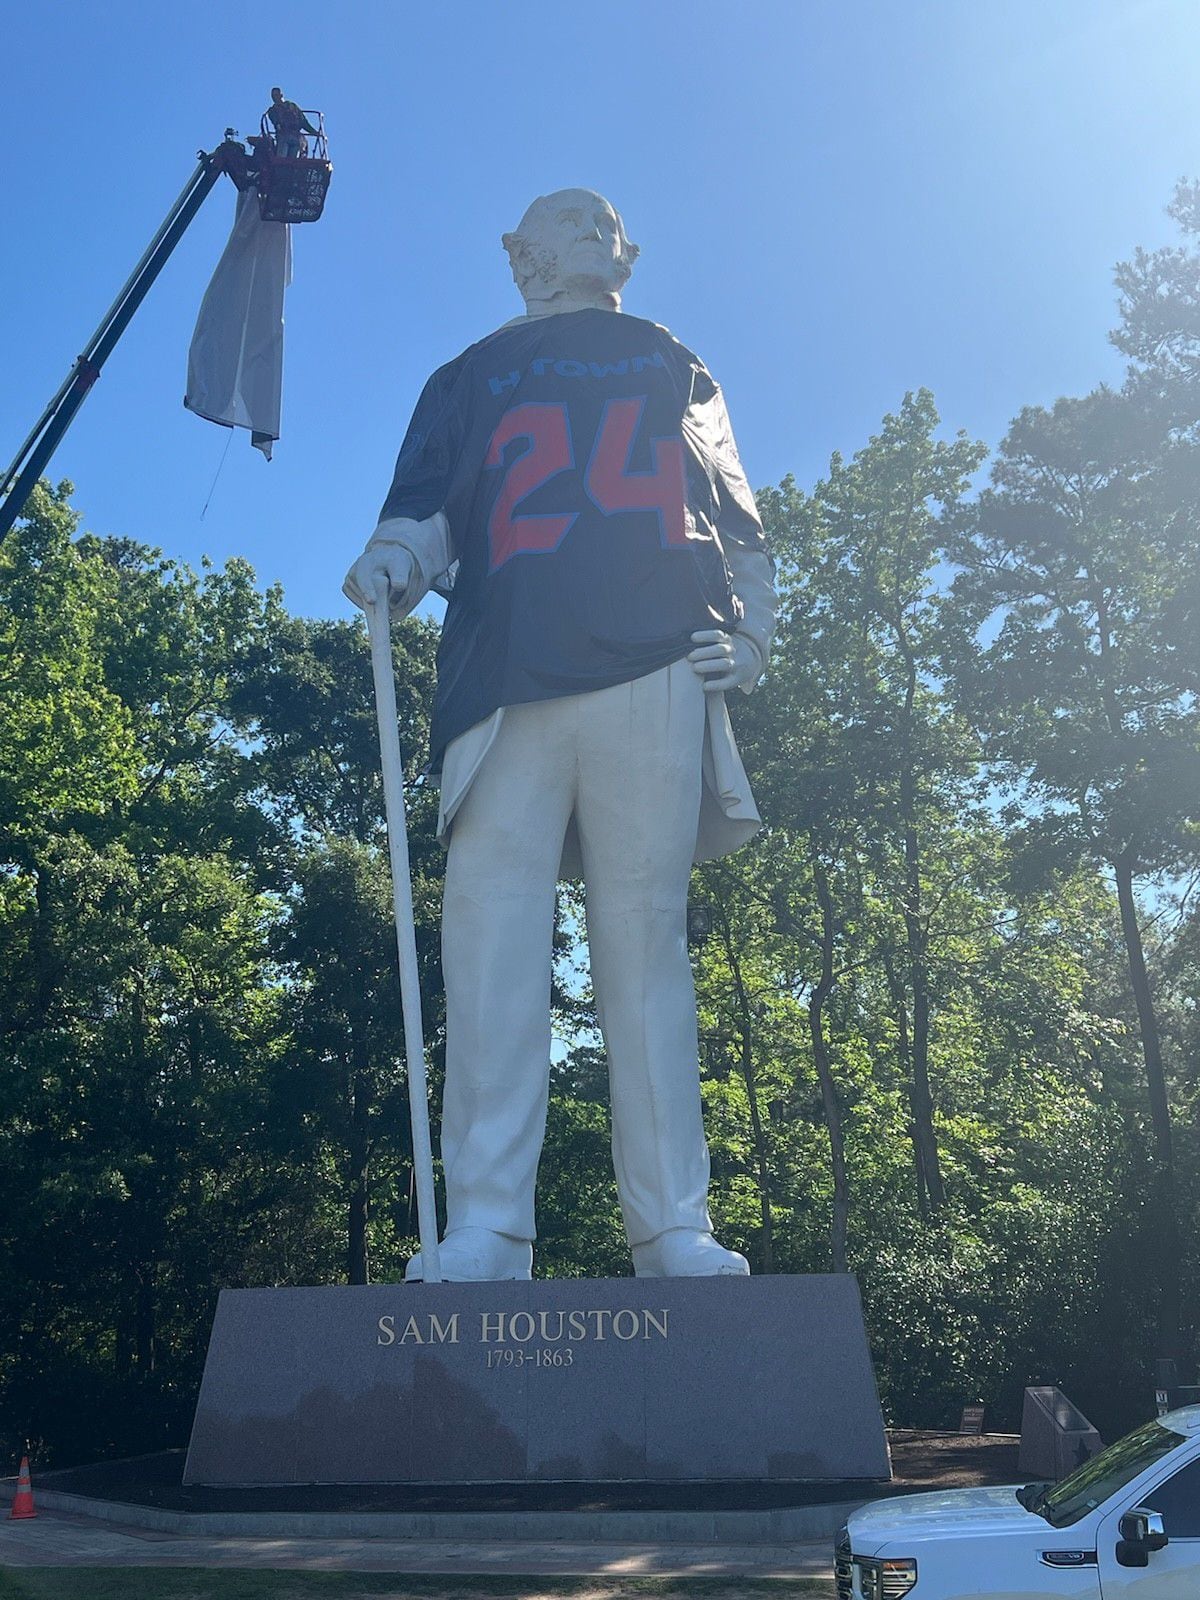 April 23, 2024: Sam Houston sporting one of the new Texans jerseys!